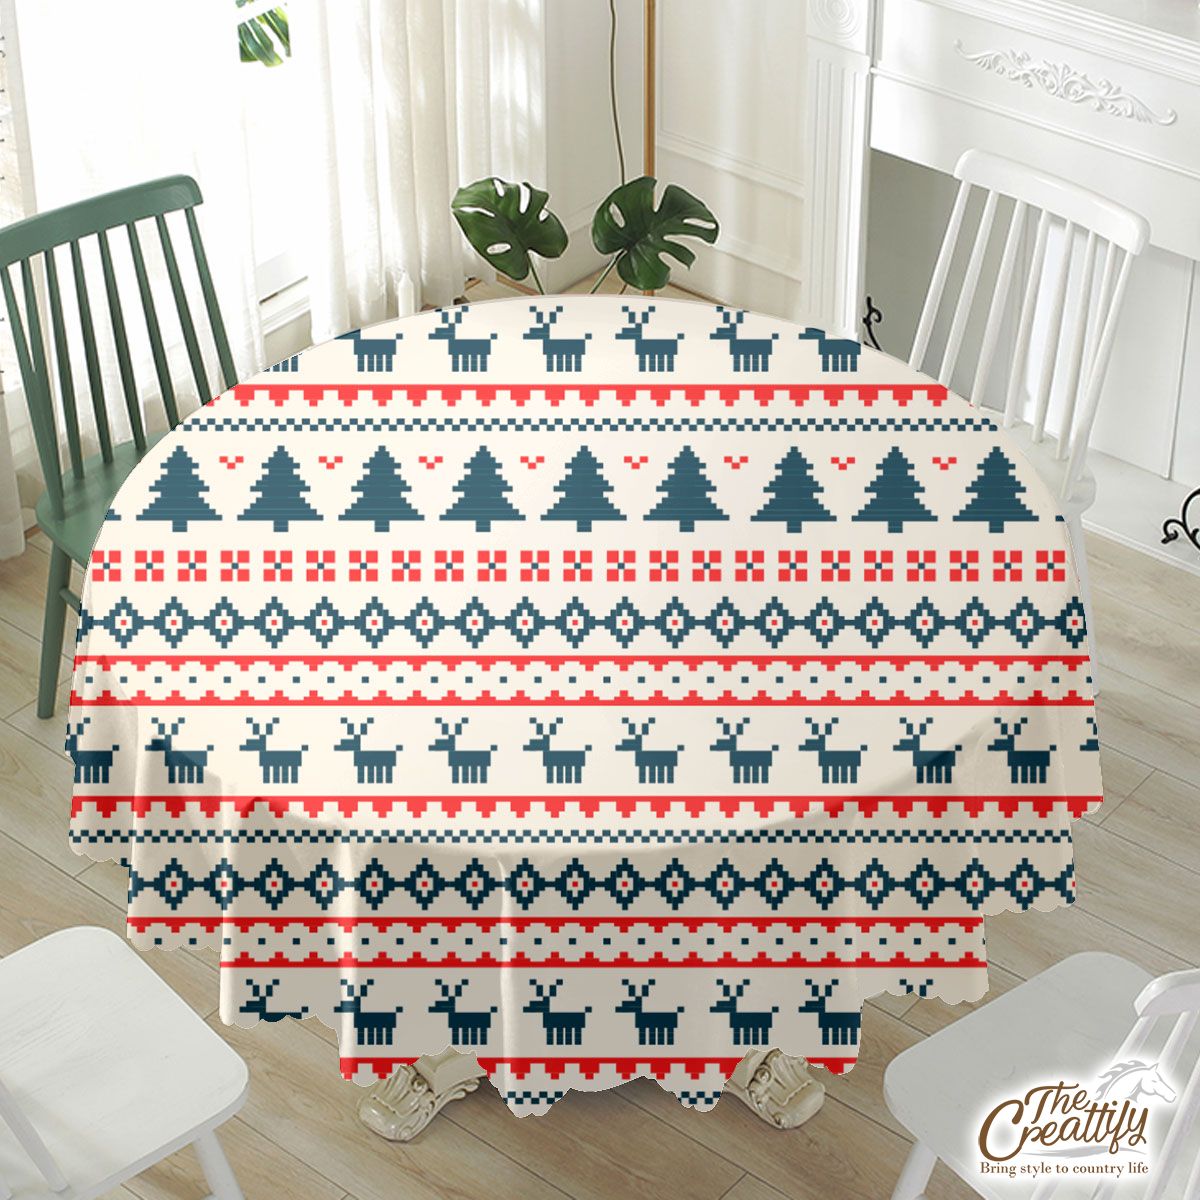 Ugly Patterns With Santas Reindeer And Pine Tree Waterproof Tablecloth